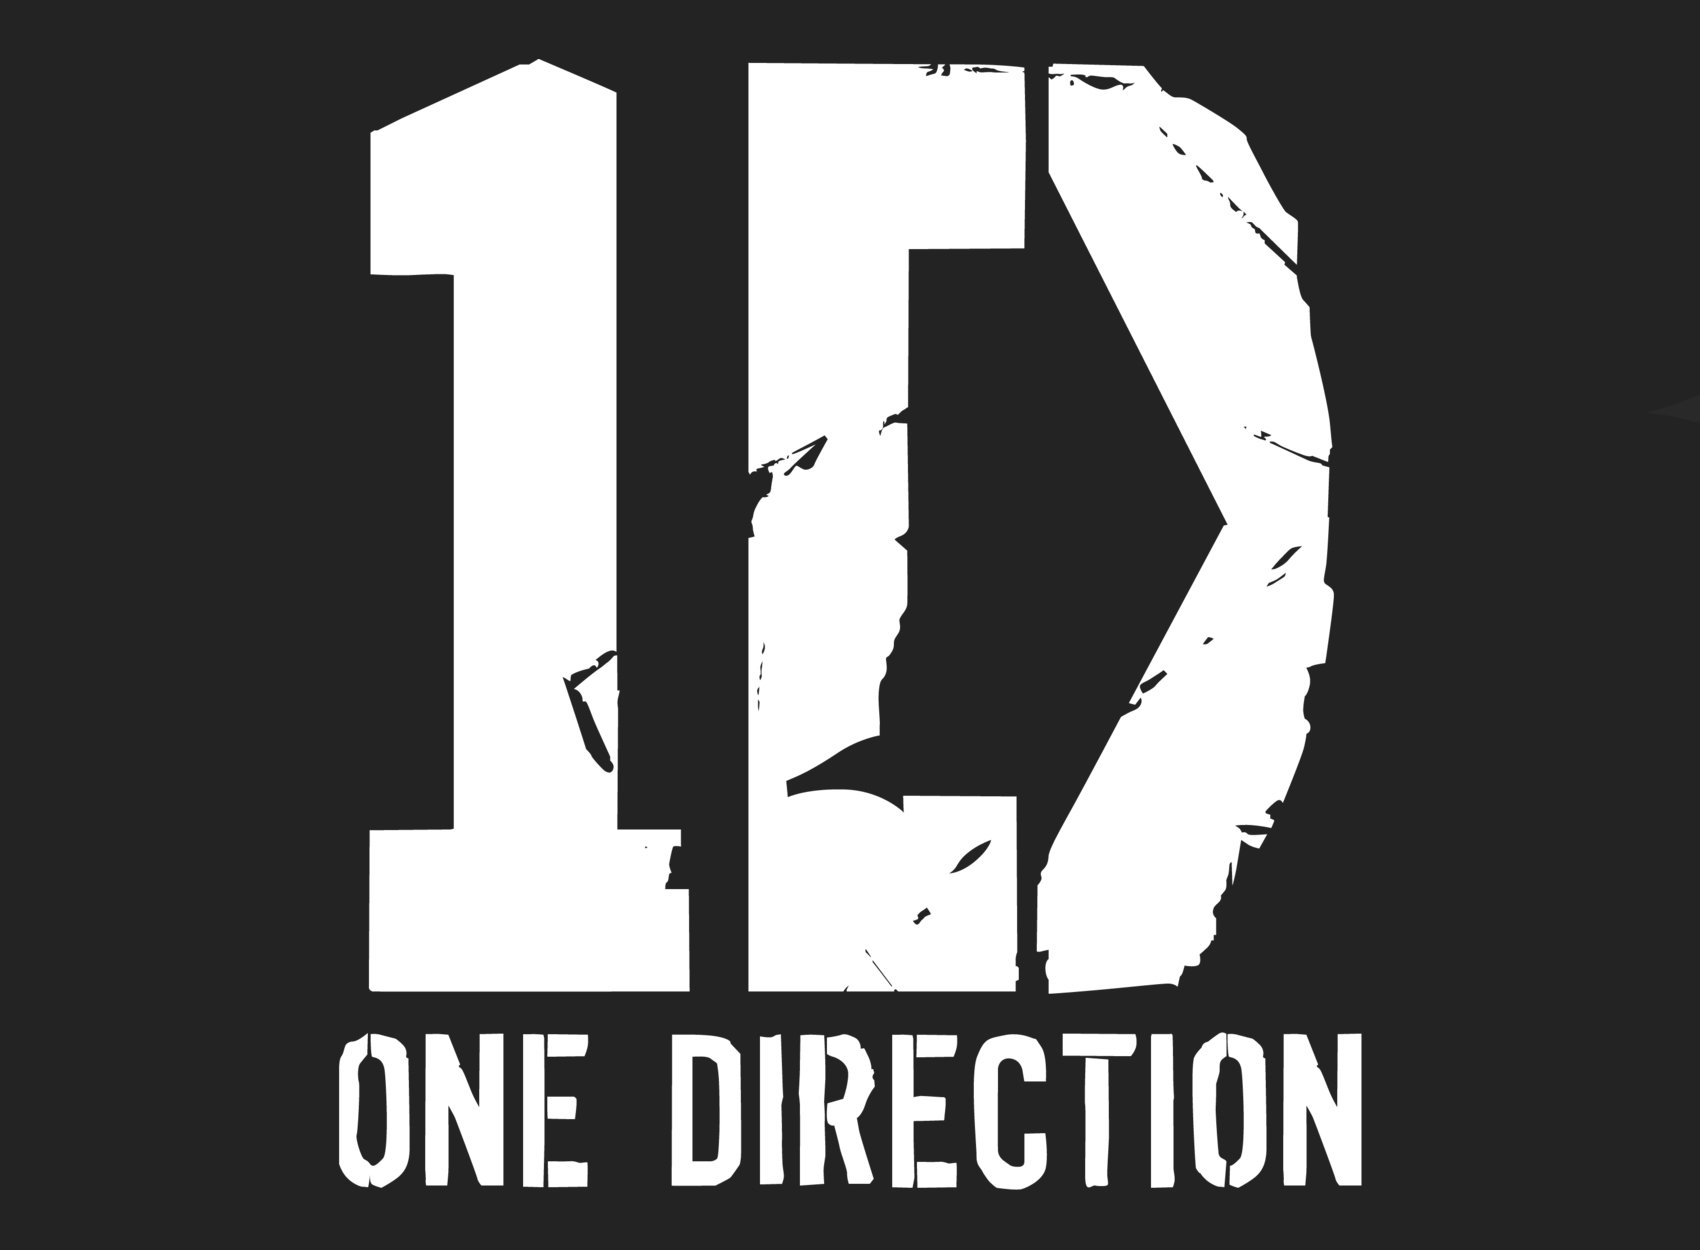 One Direction Logo, One Direction Symbol, Meaning, History ...